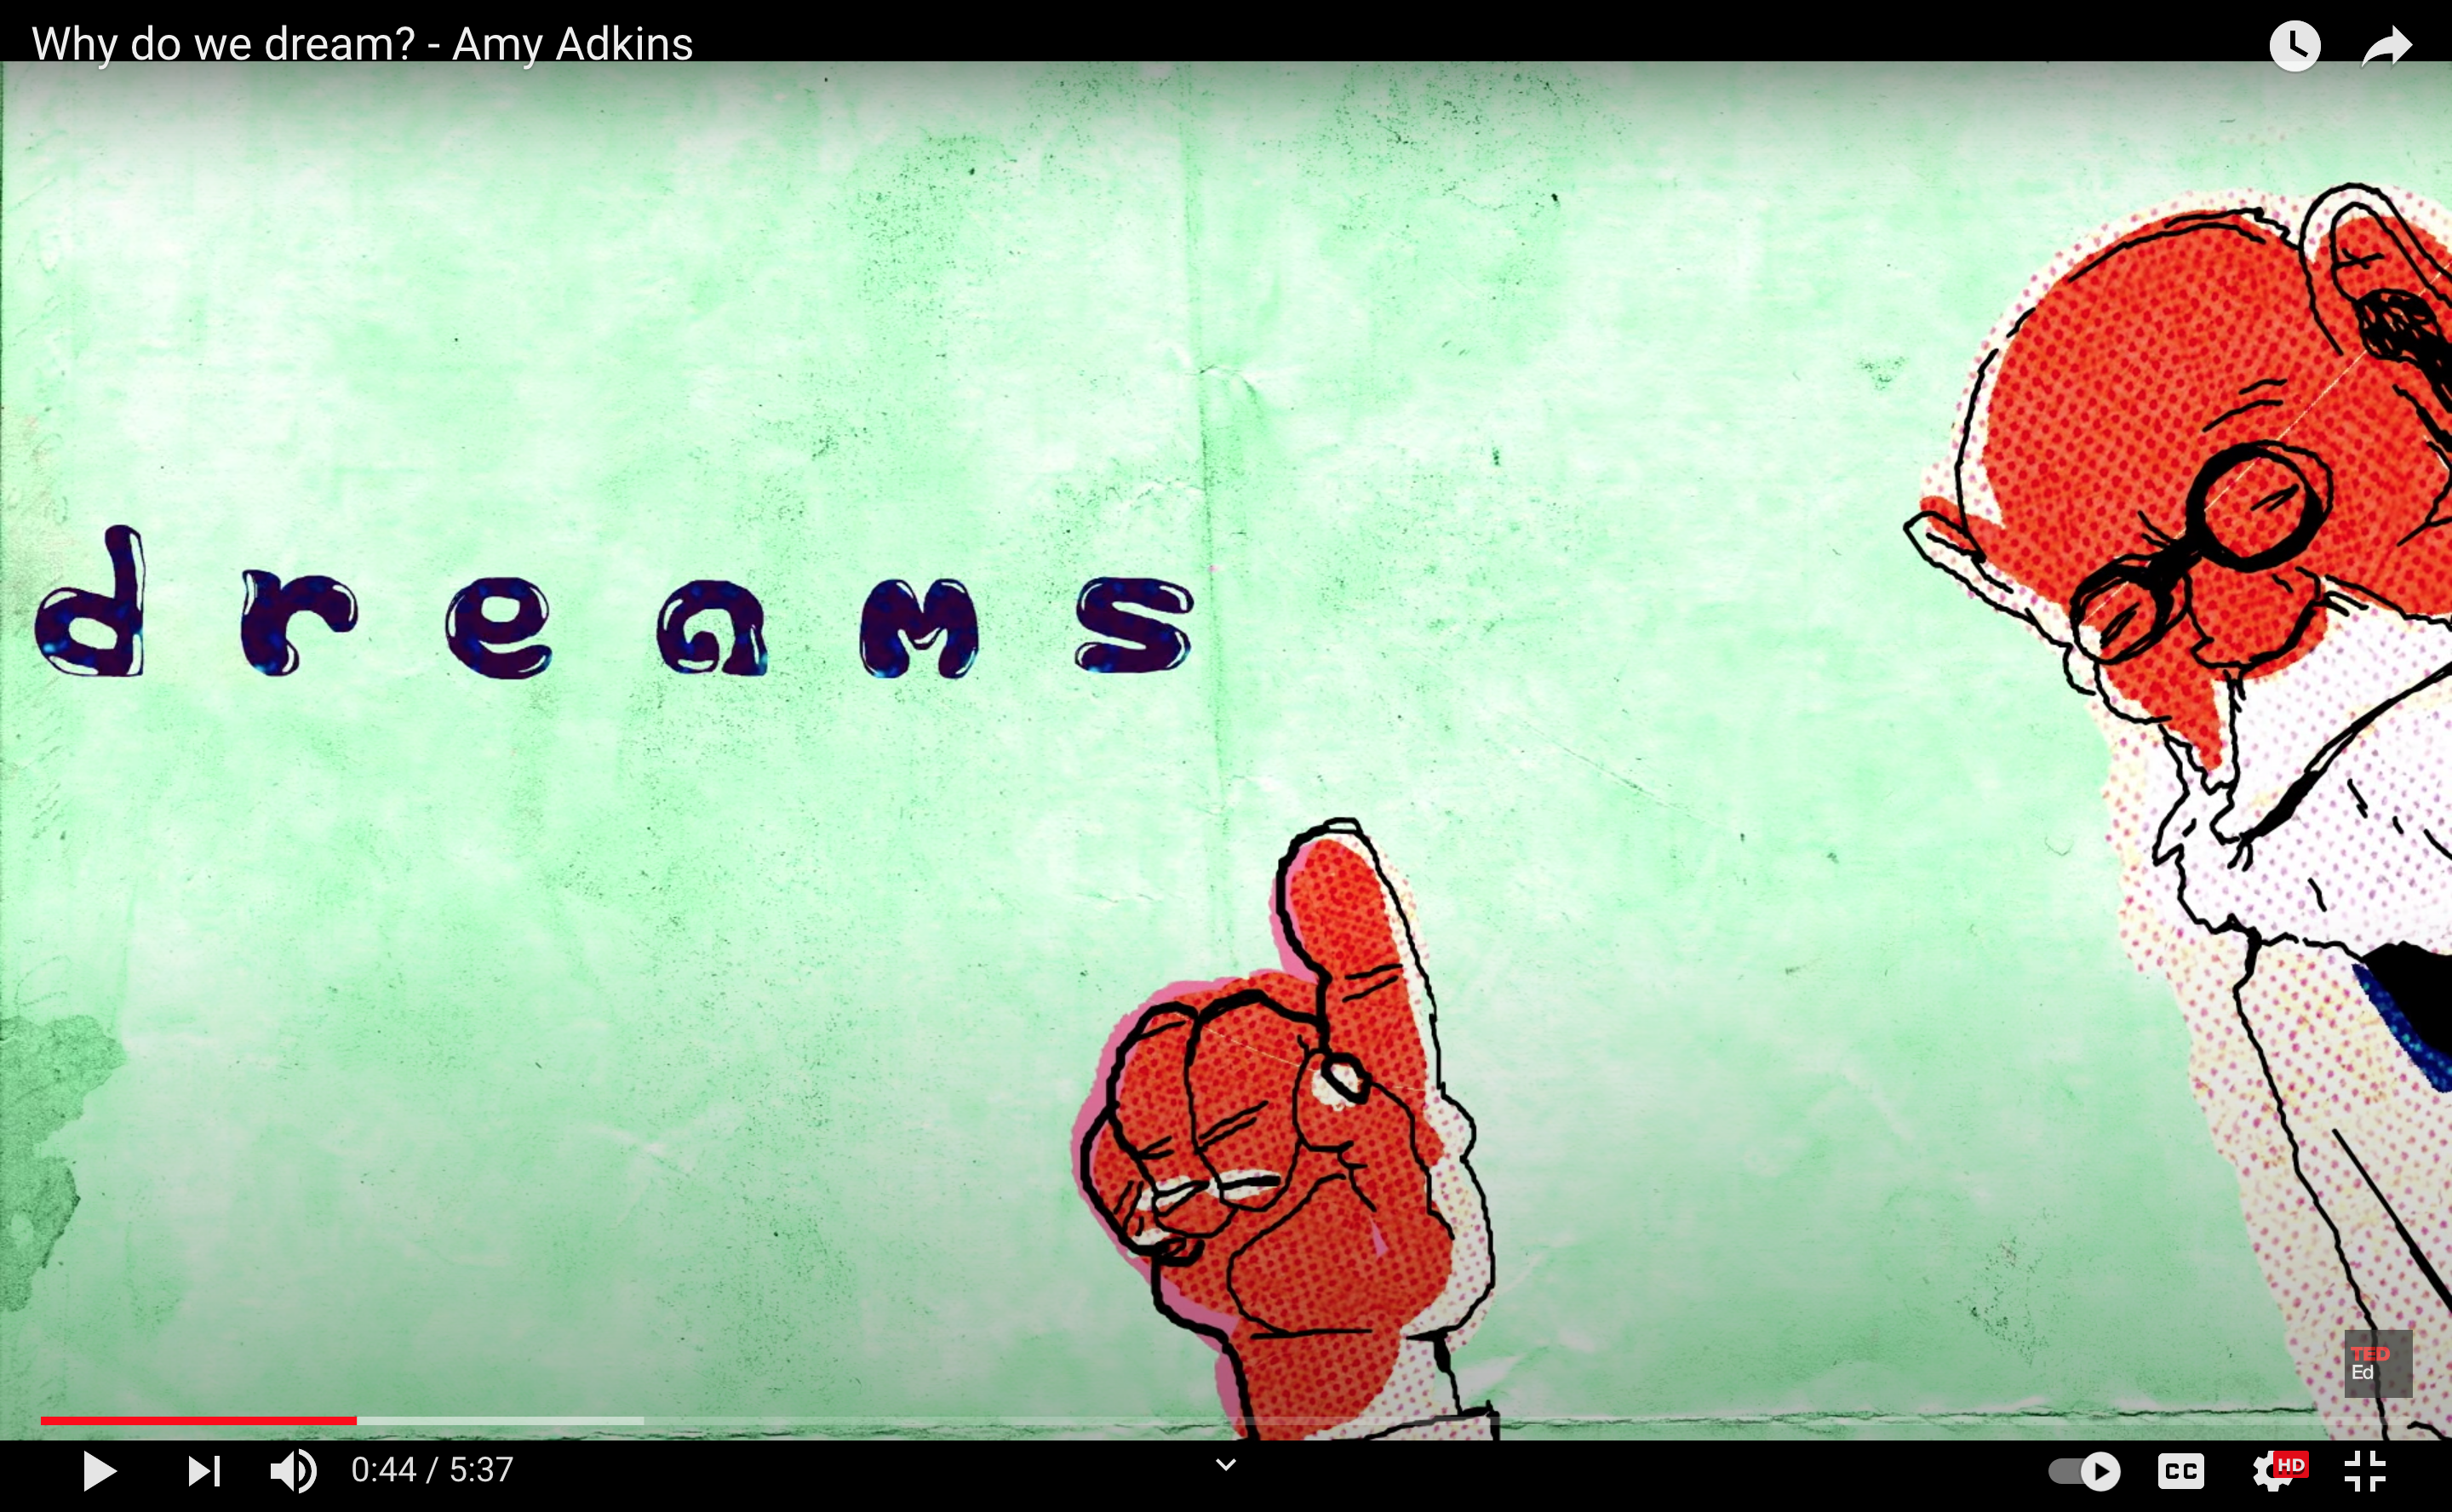 Ted-Ed video "Why do we dream?"